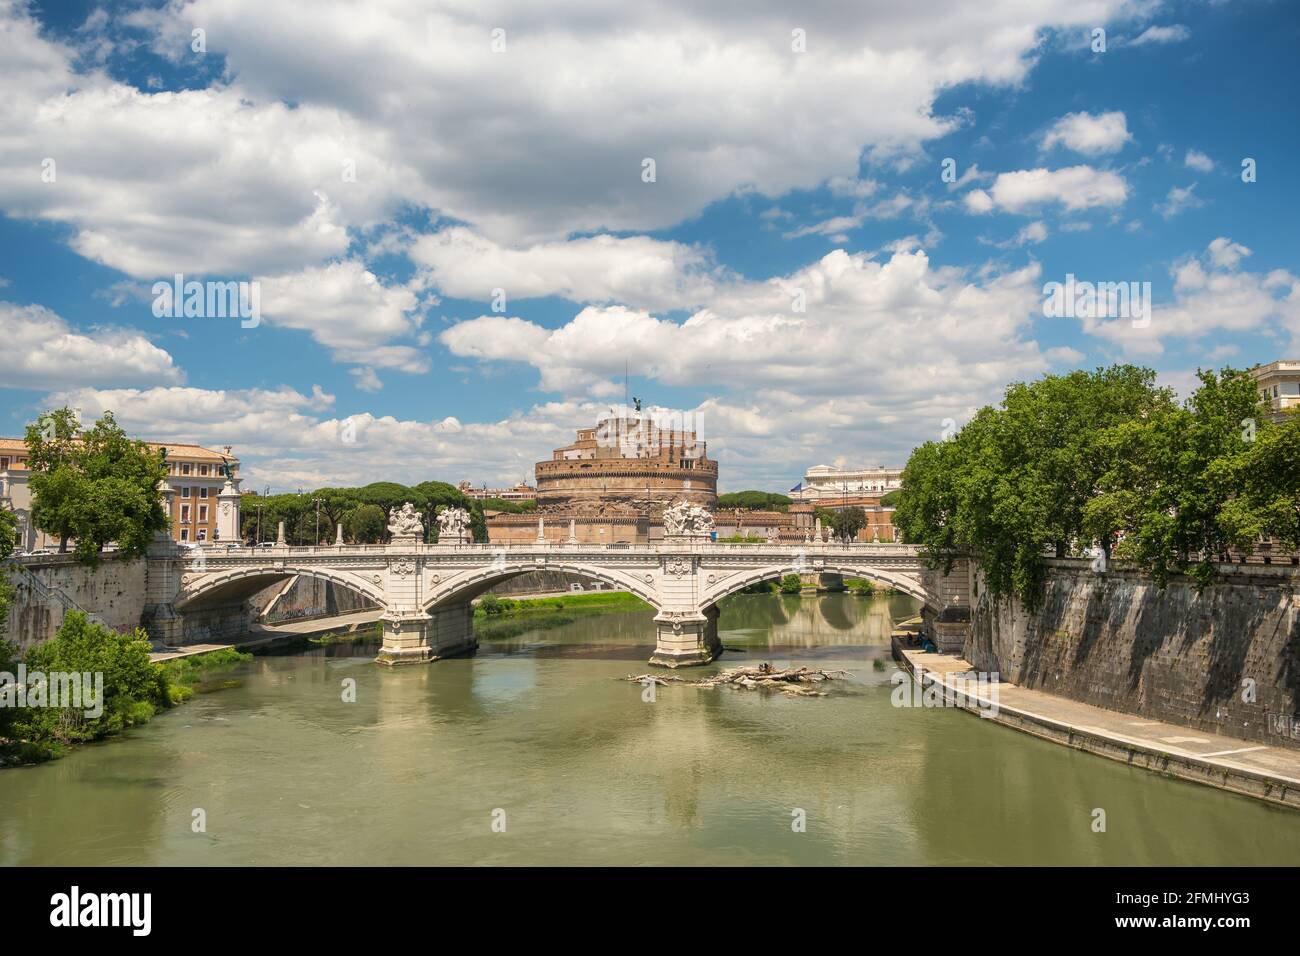 Saint Angelo castle and bridge over the Tiber river in Rome Stock Photo